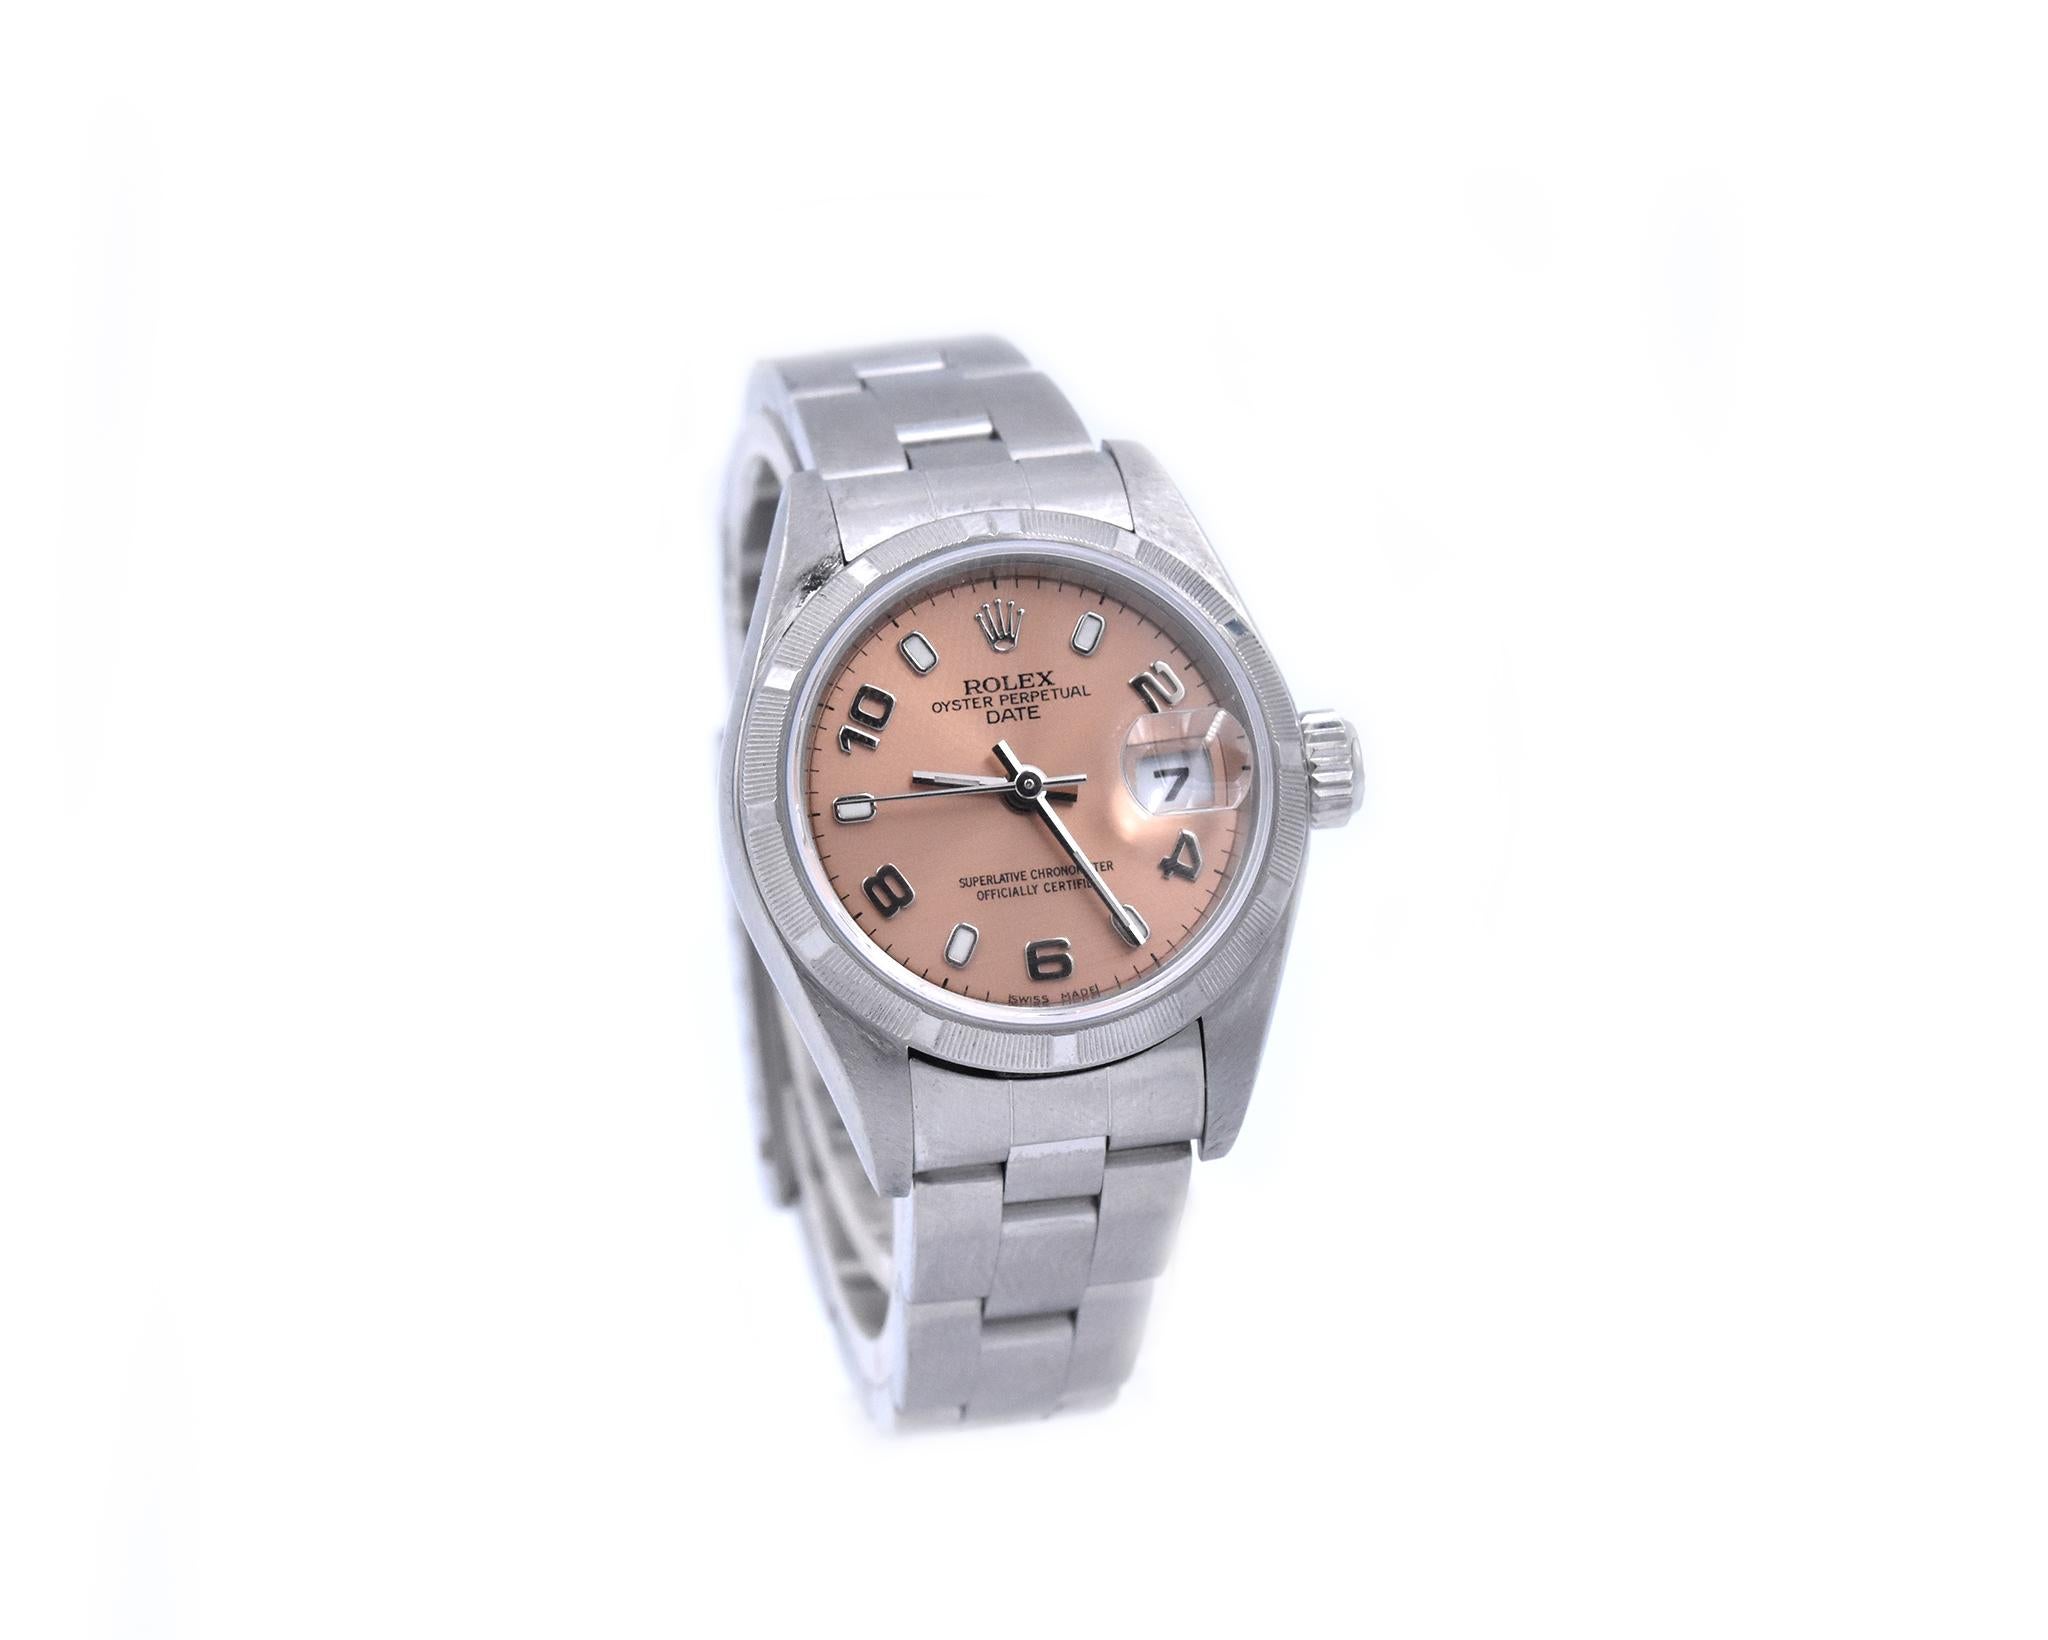 Movement: automatic
Function: hours, minutes, seconds, date at 3 o’clock 
Case: 26mm steel case, engine turned bezel, sapphire crystal
Band: Rolex stainless steel oyster bracelet
Dial: peach dial, luminescent alternating hour markers and